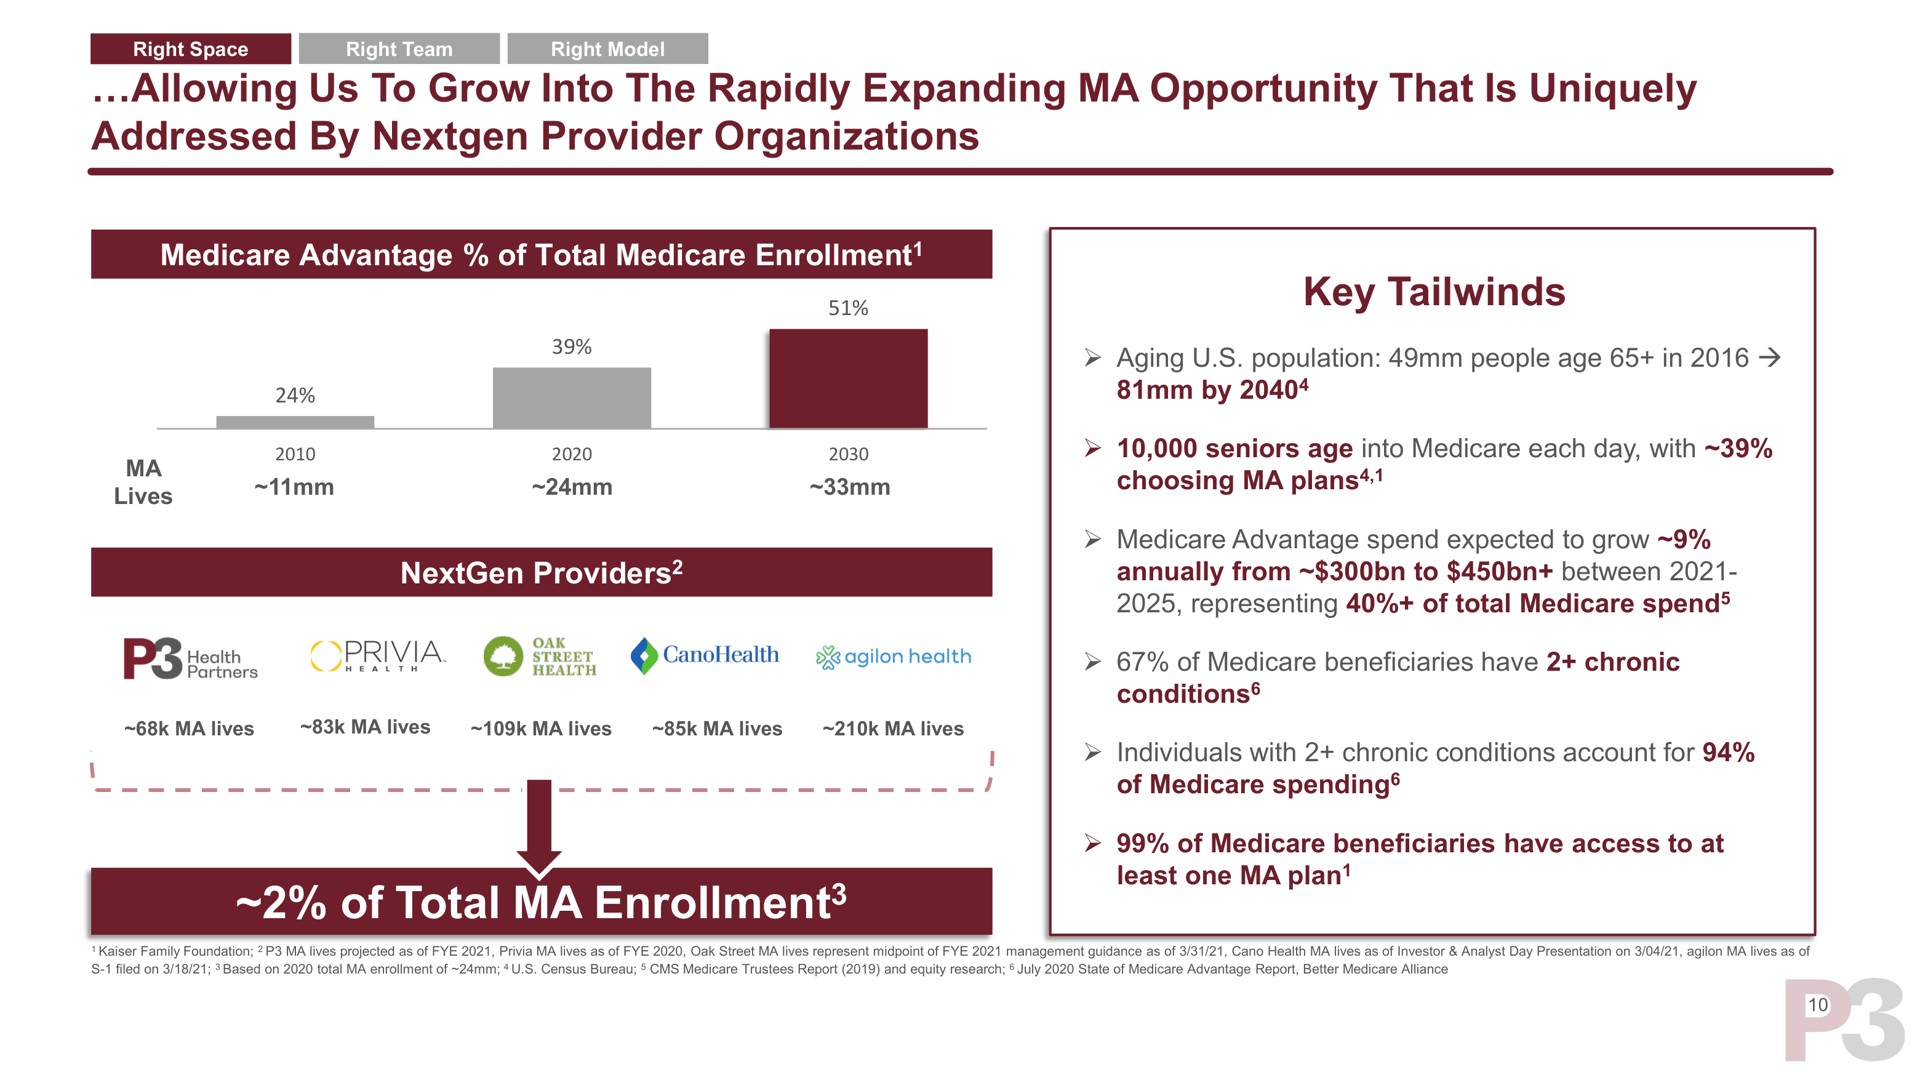 allowing us to grow into the rapidly expanding opportunity that is uniquely addressed by provider organizations of total enrollment key enrollment | P3 Health Partners